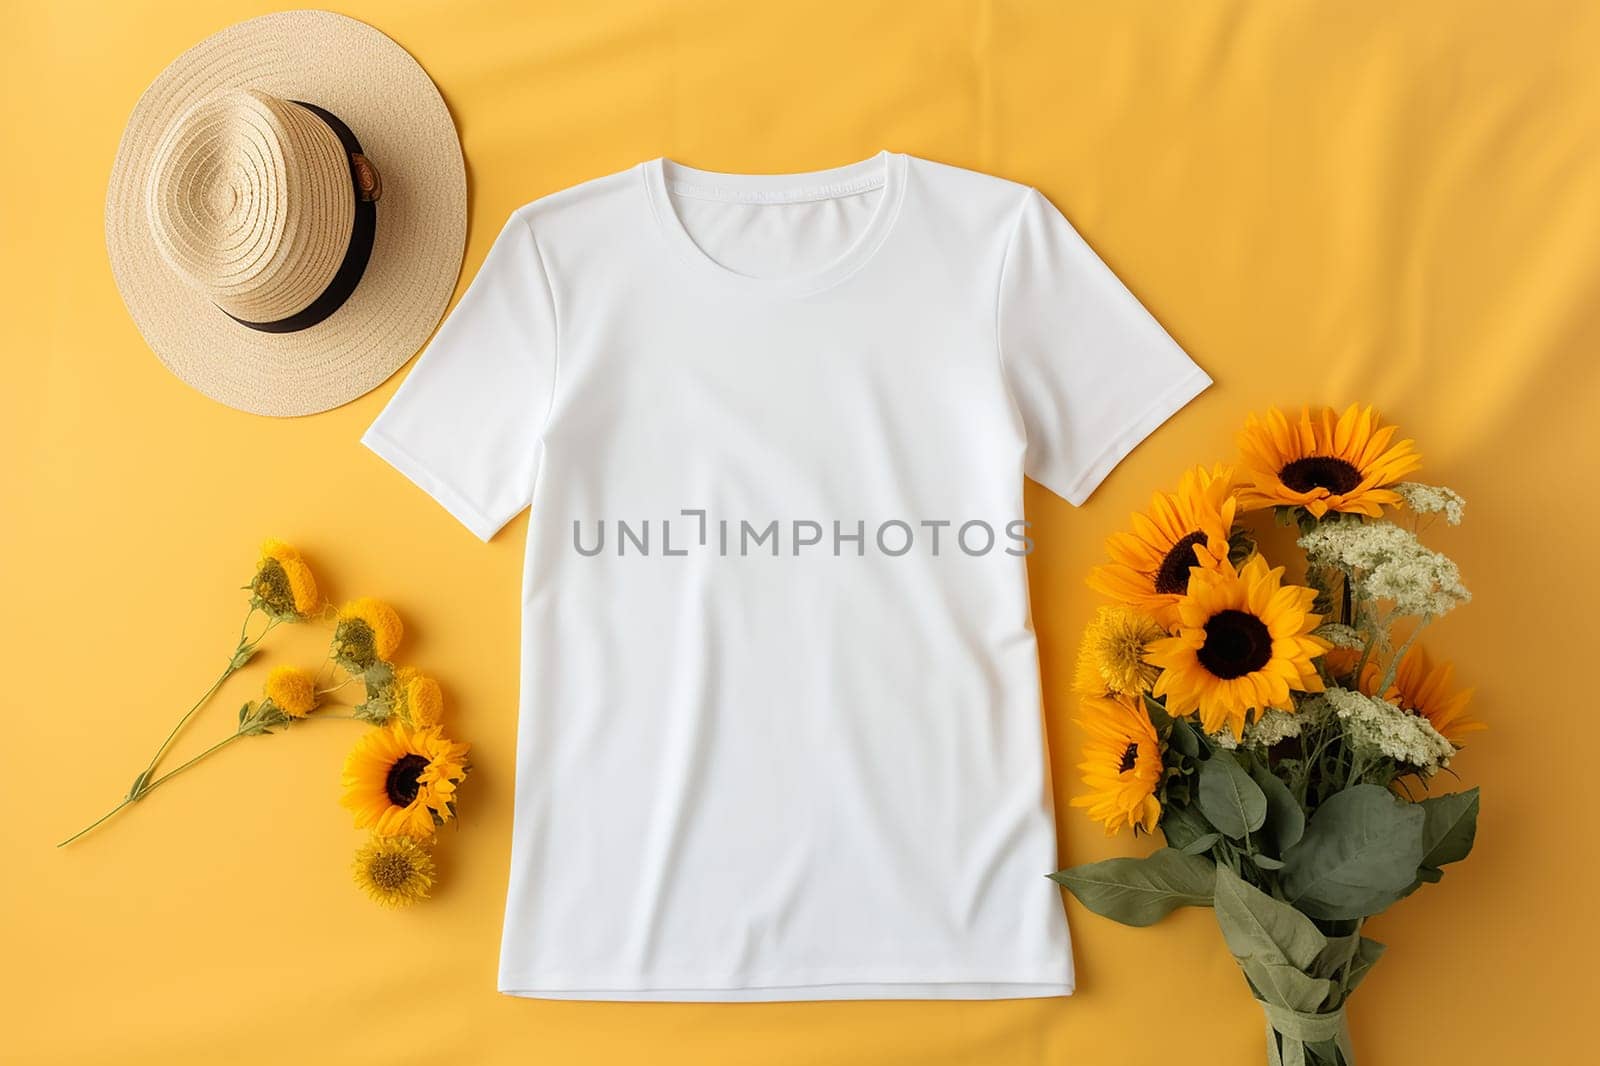 Plain white t-shirt with sunflowers and a straw hat on yellow background.